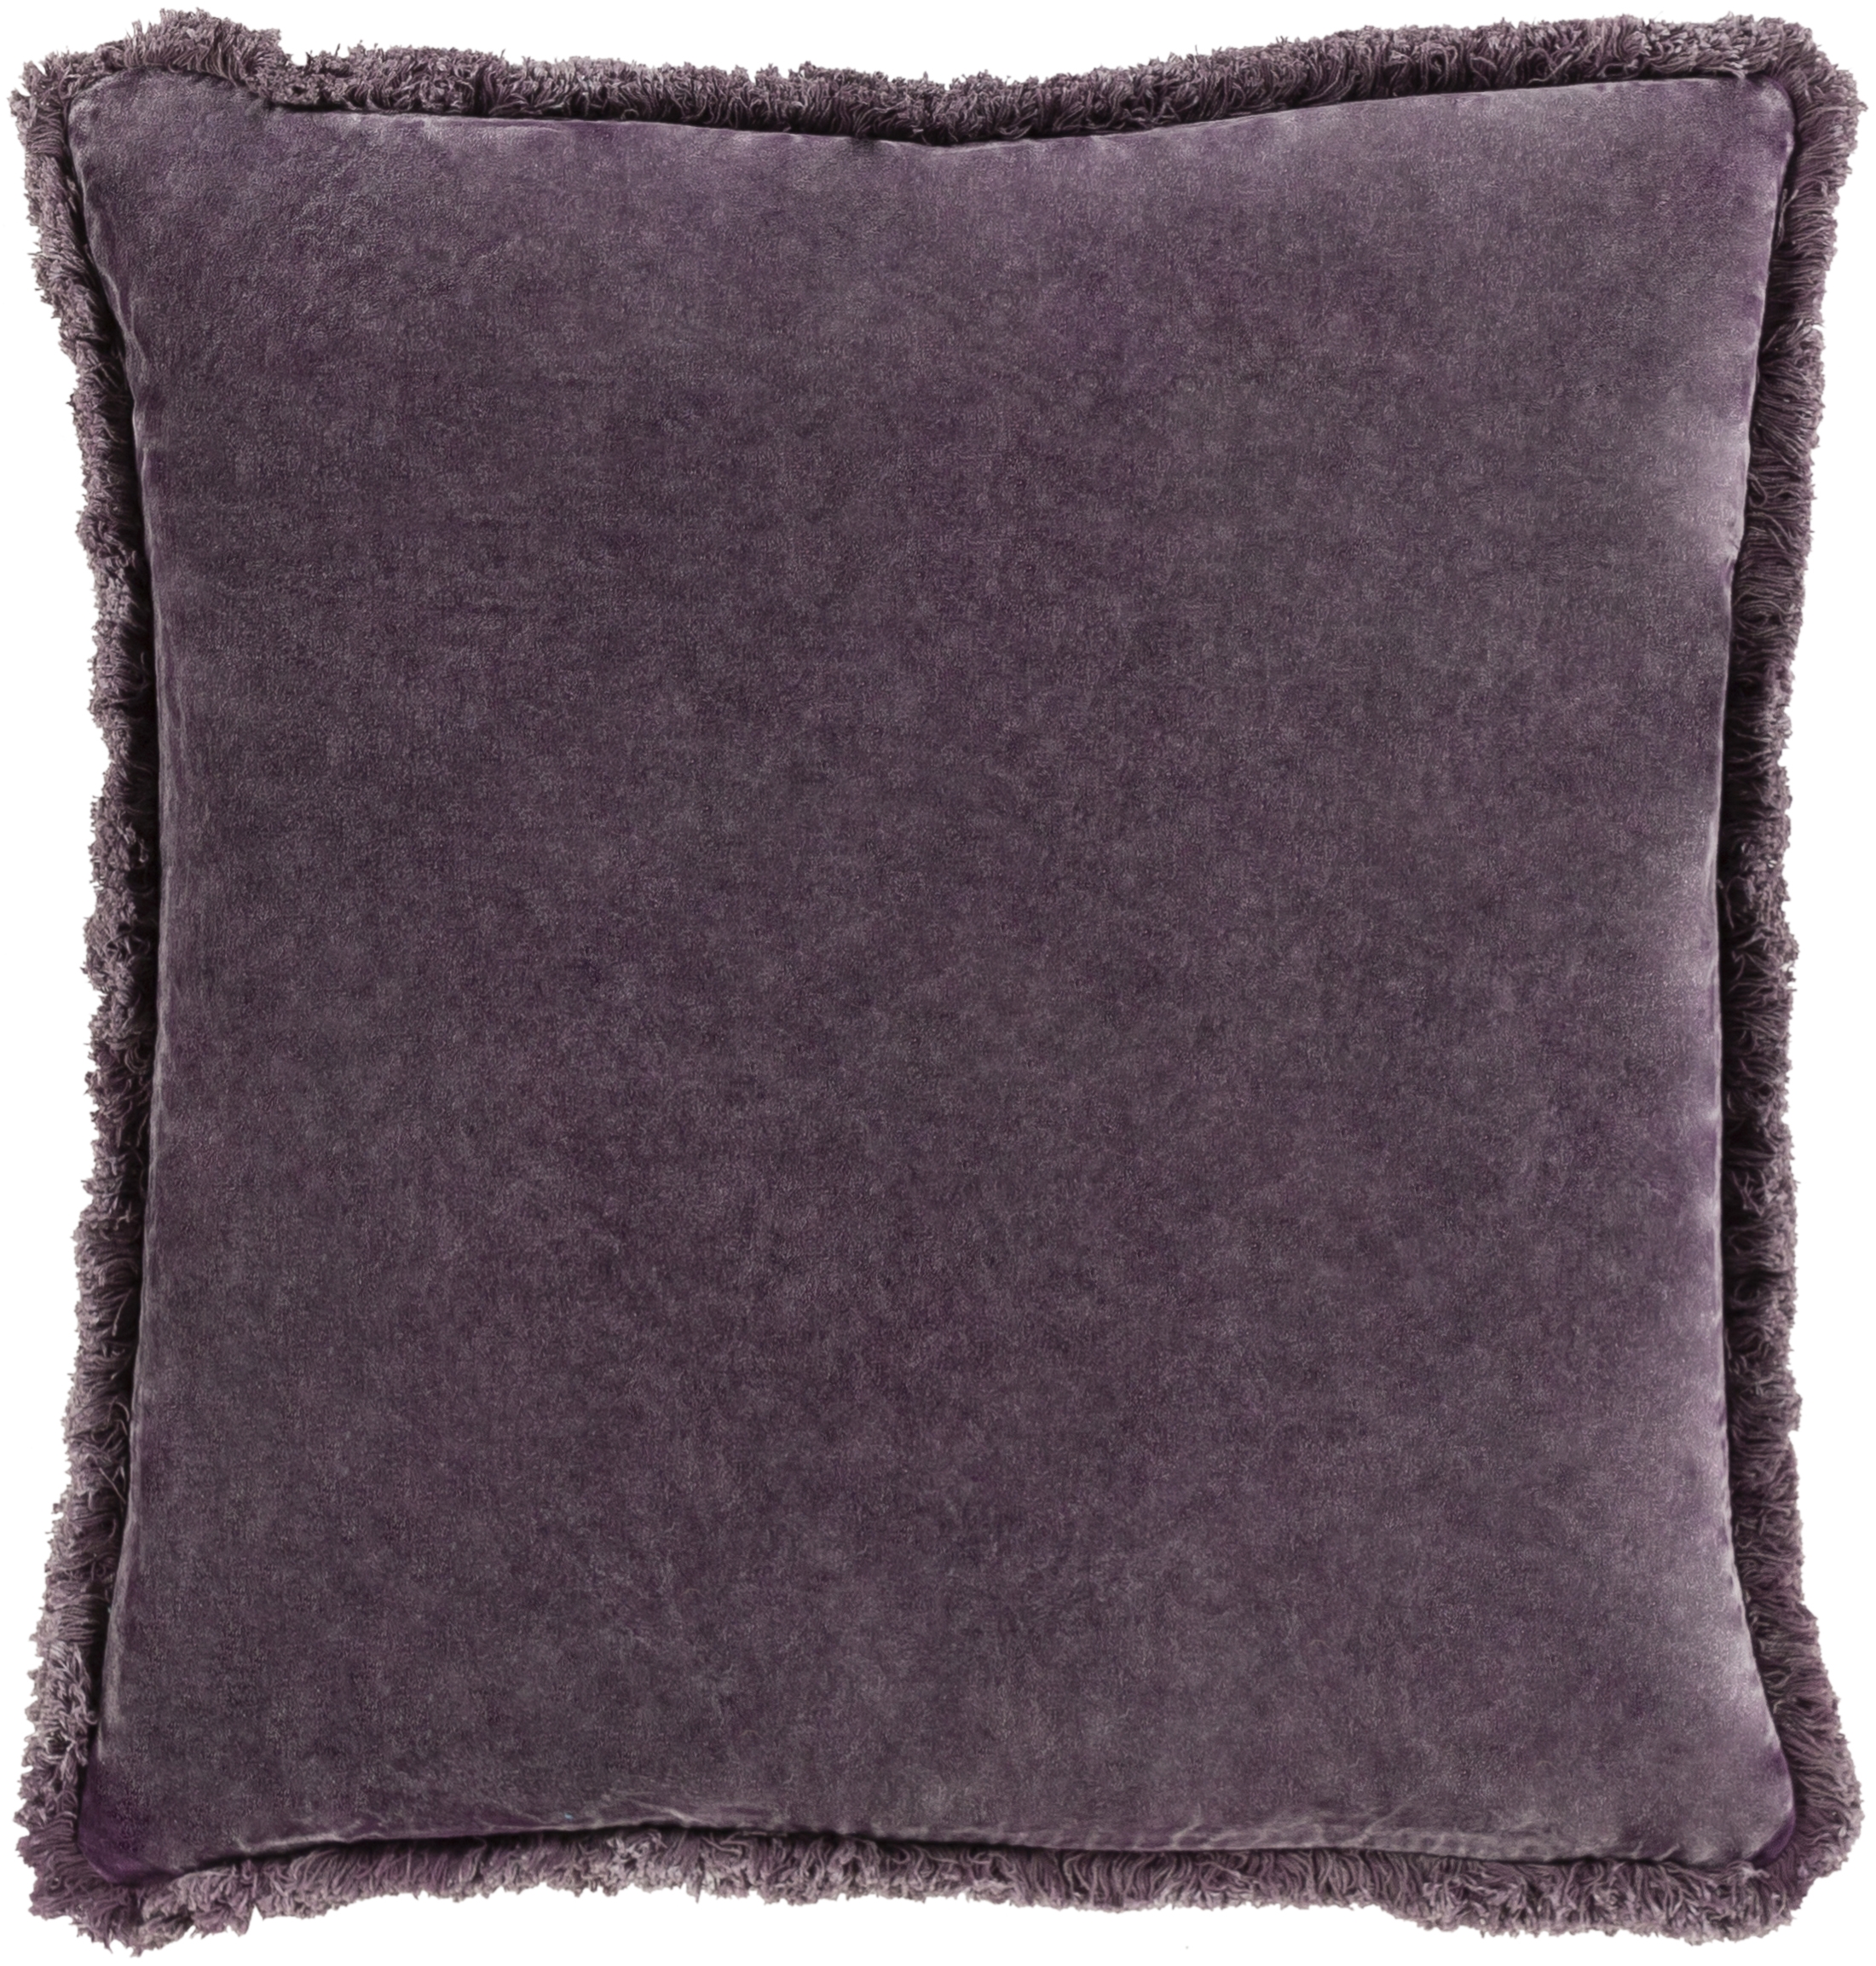 Washed Cotton Velvet Throw Pillow, 20" x 20", pillow cover only - Image 0